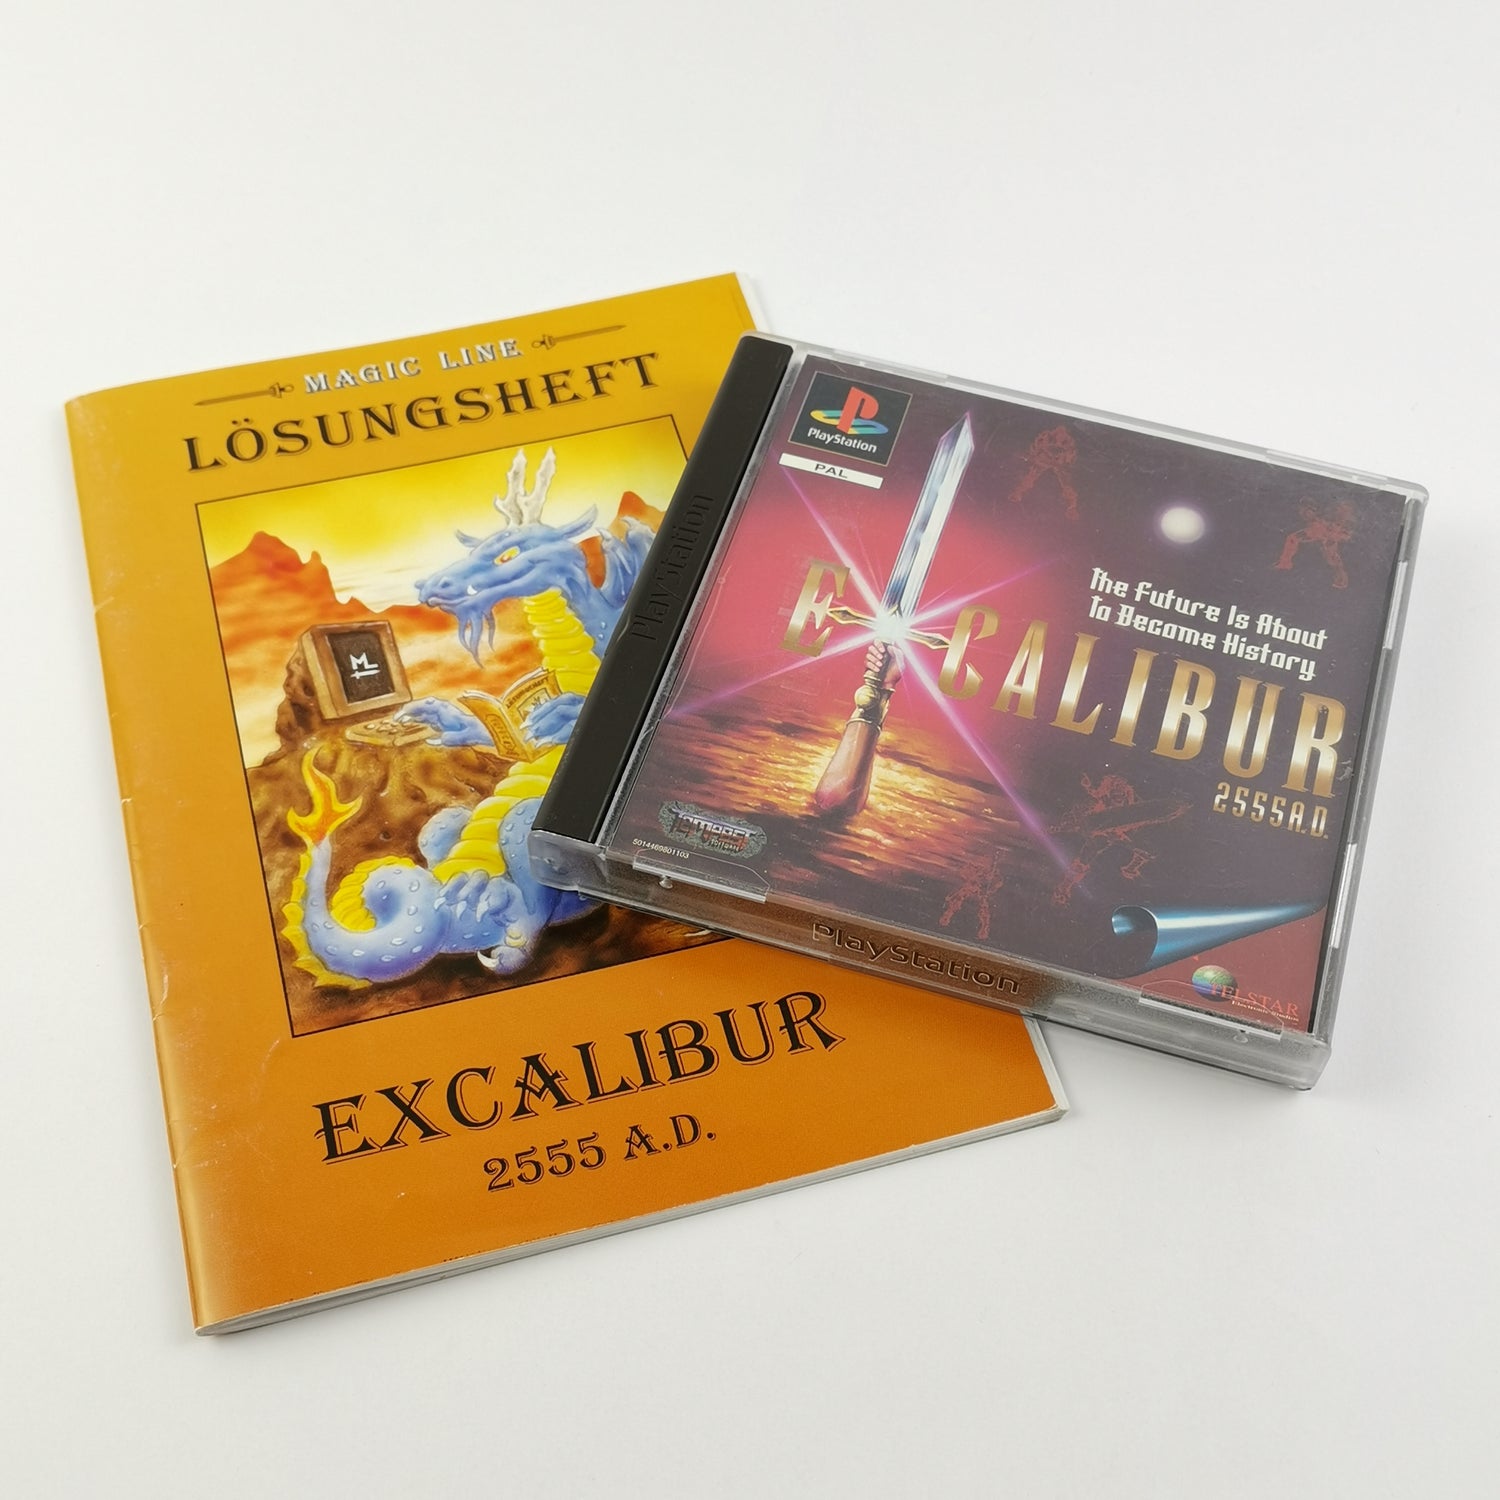 Sony Playstation 1 game: Excalibur + Magic Line solution booklet - OVP PS1 PSX PAL